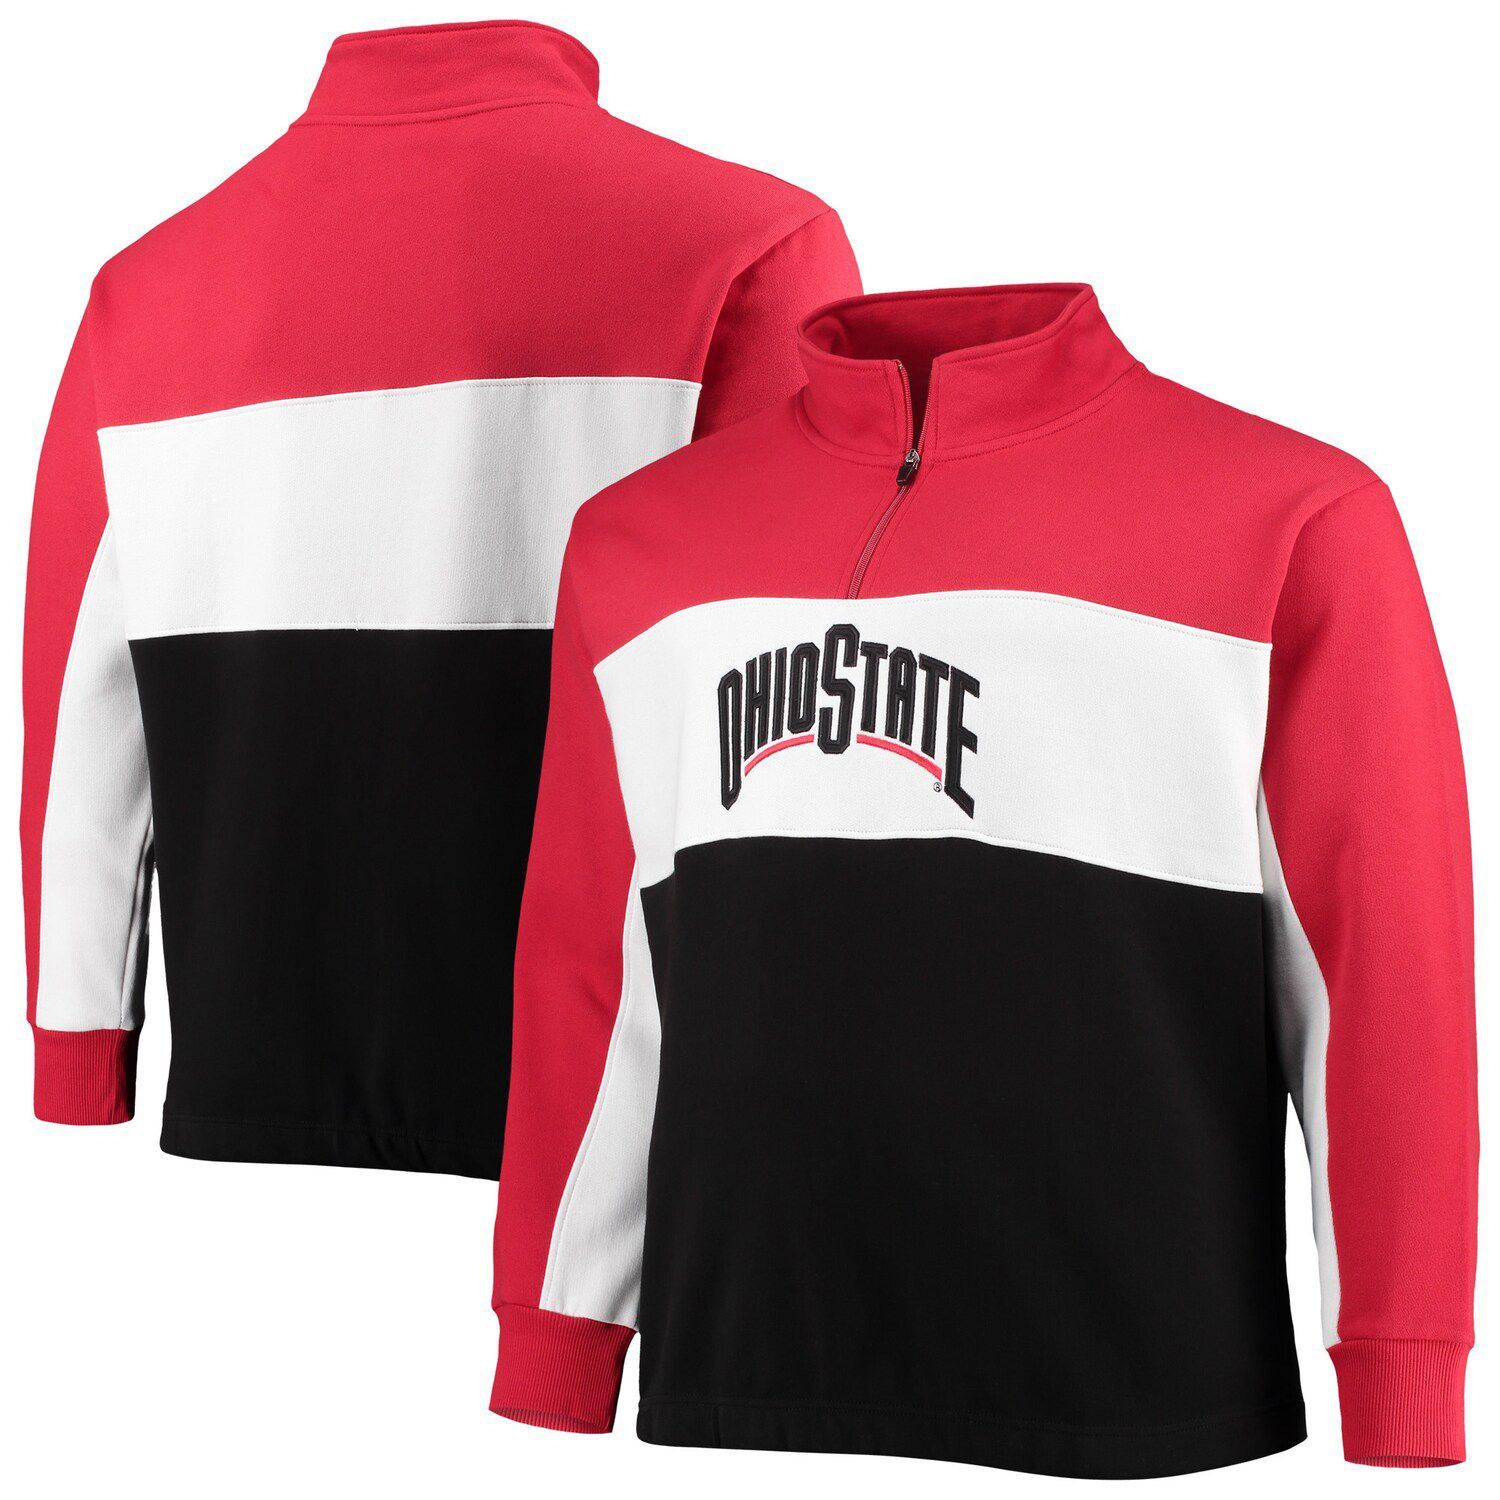 Image for Unbranded Women's Profile Scarlet/Black Ohio State Buckeyes Plus Size Colorblocked Half-Zip Jacket at Kohl's.